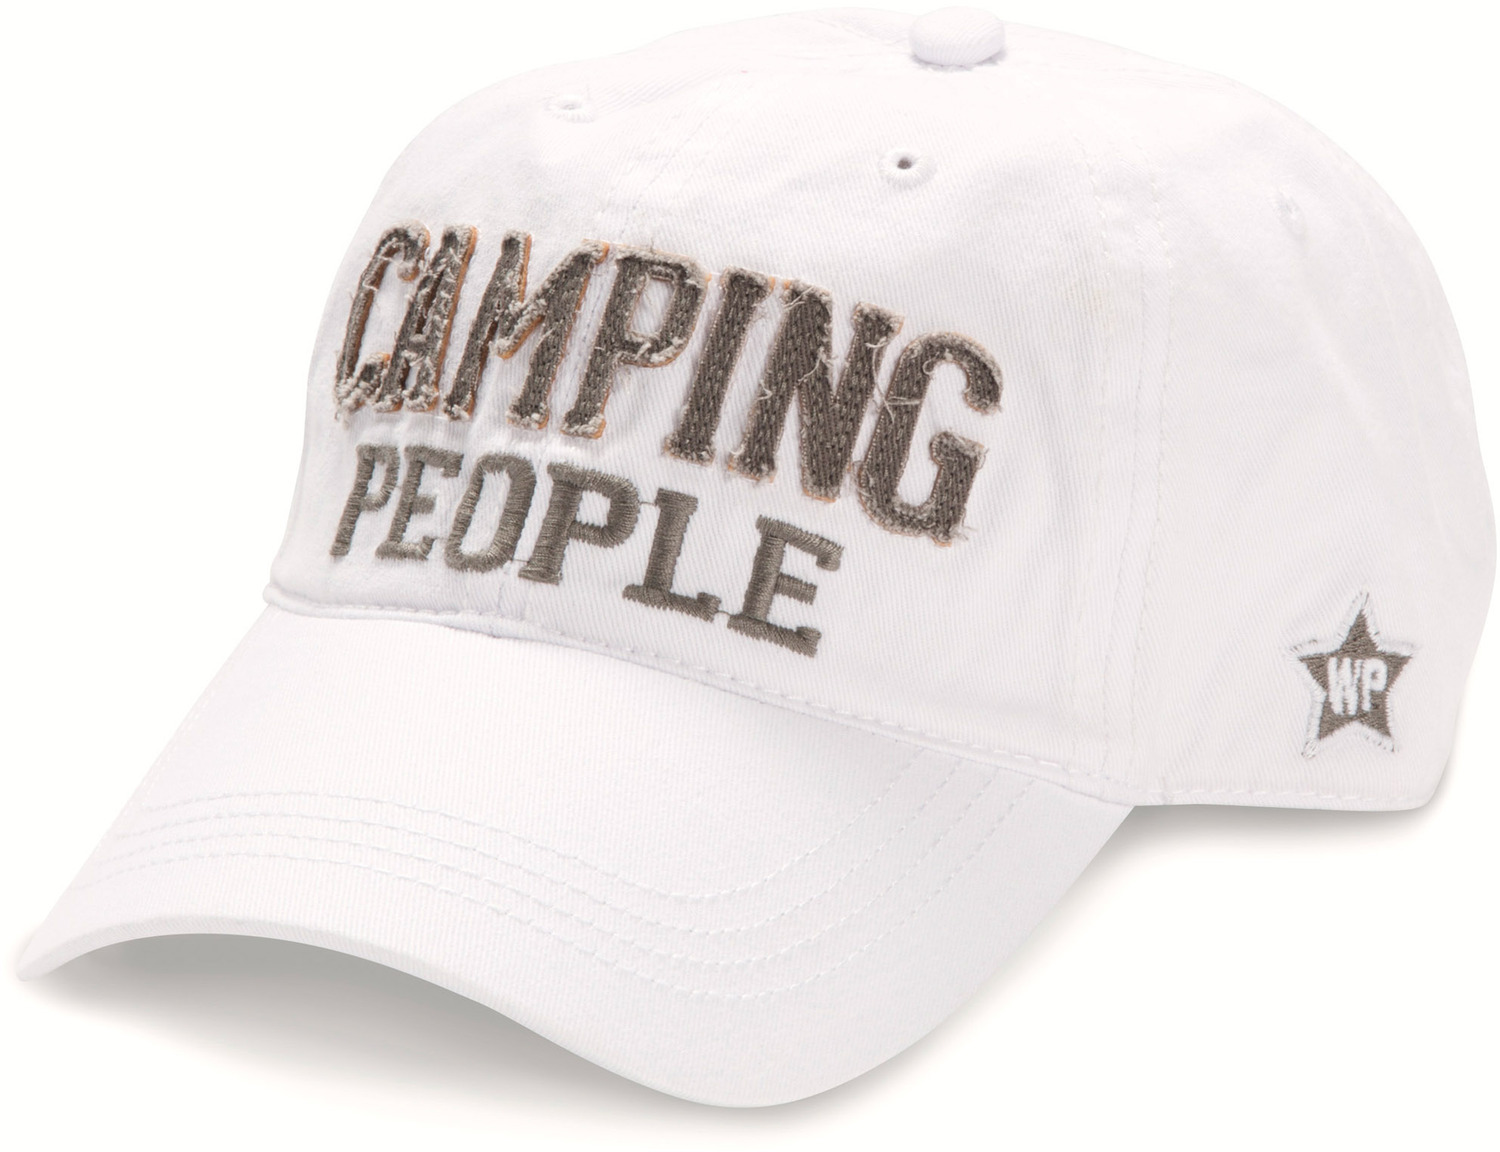 Camping People by We People - White Unisex Adjustable Camping Hat